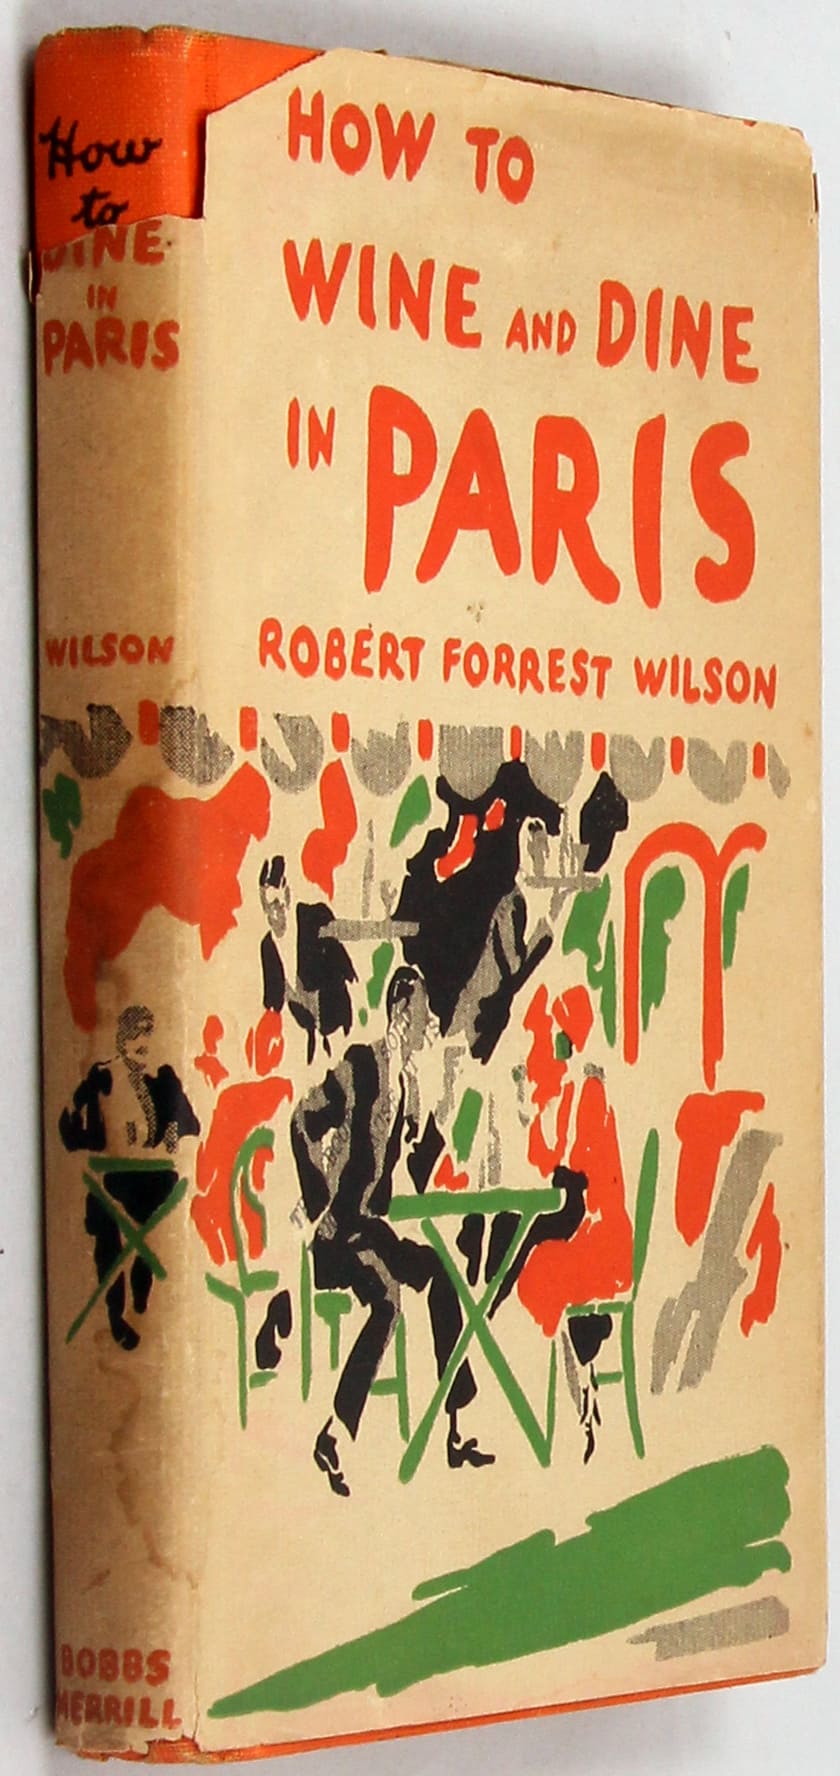 Robert Forrest Wilson, How to Wine and Dine in Paris